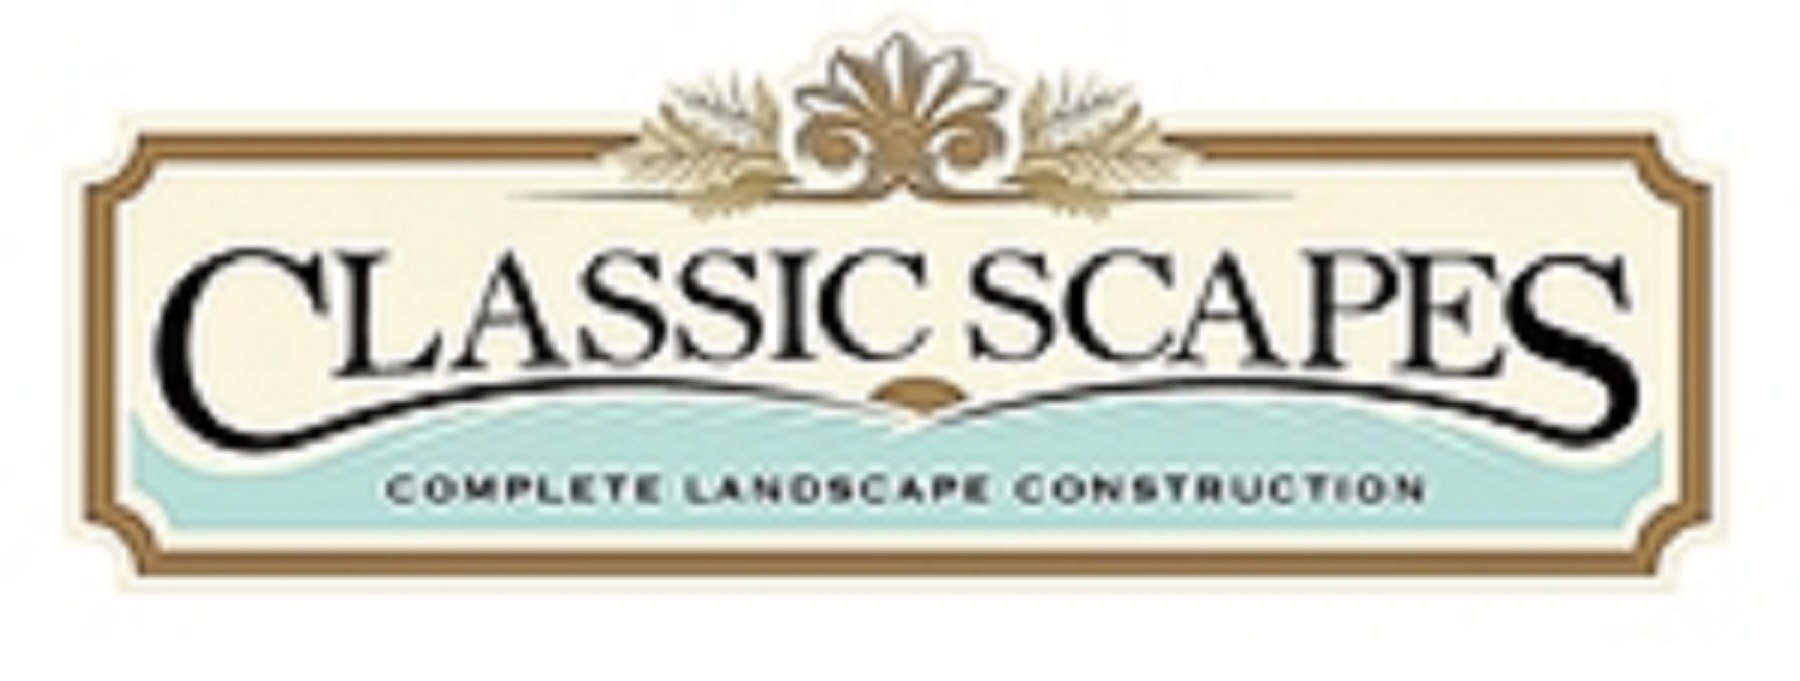 Classic Scapes Logo